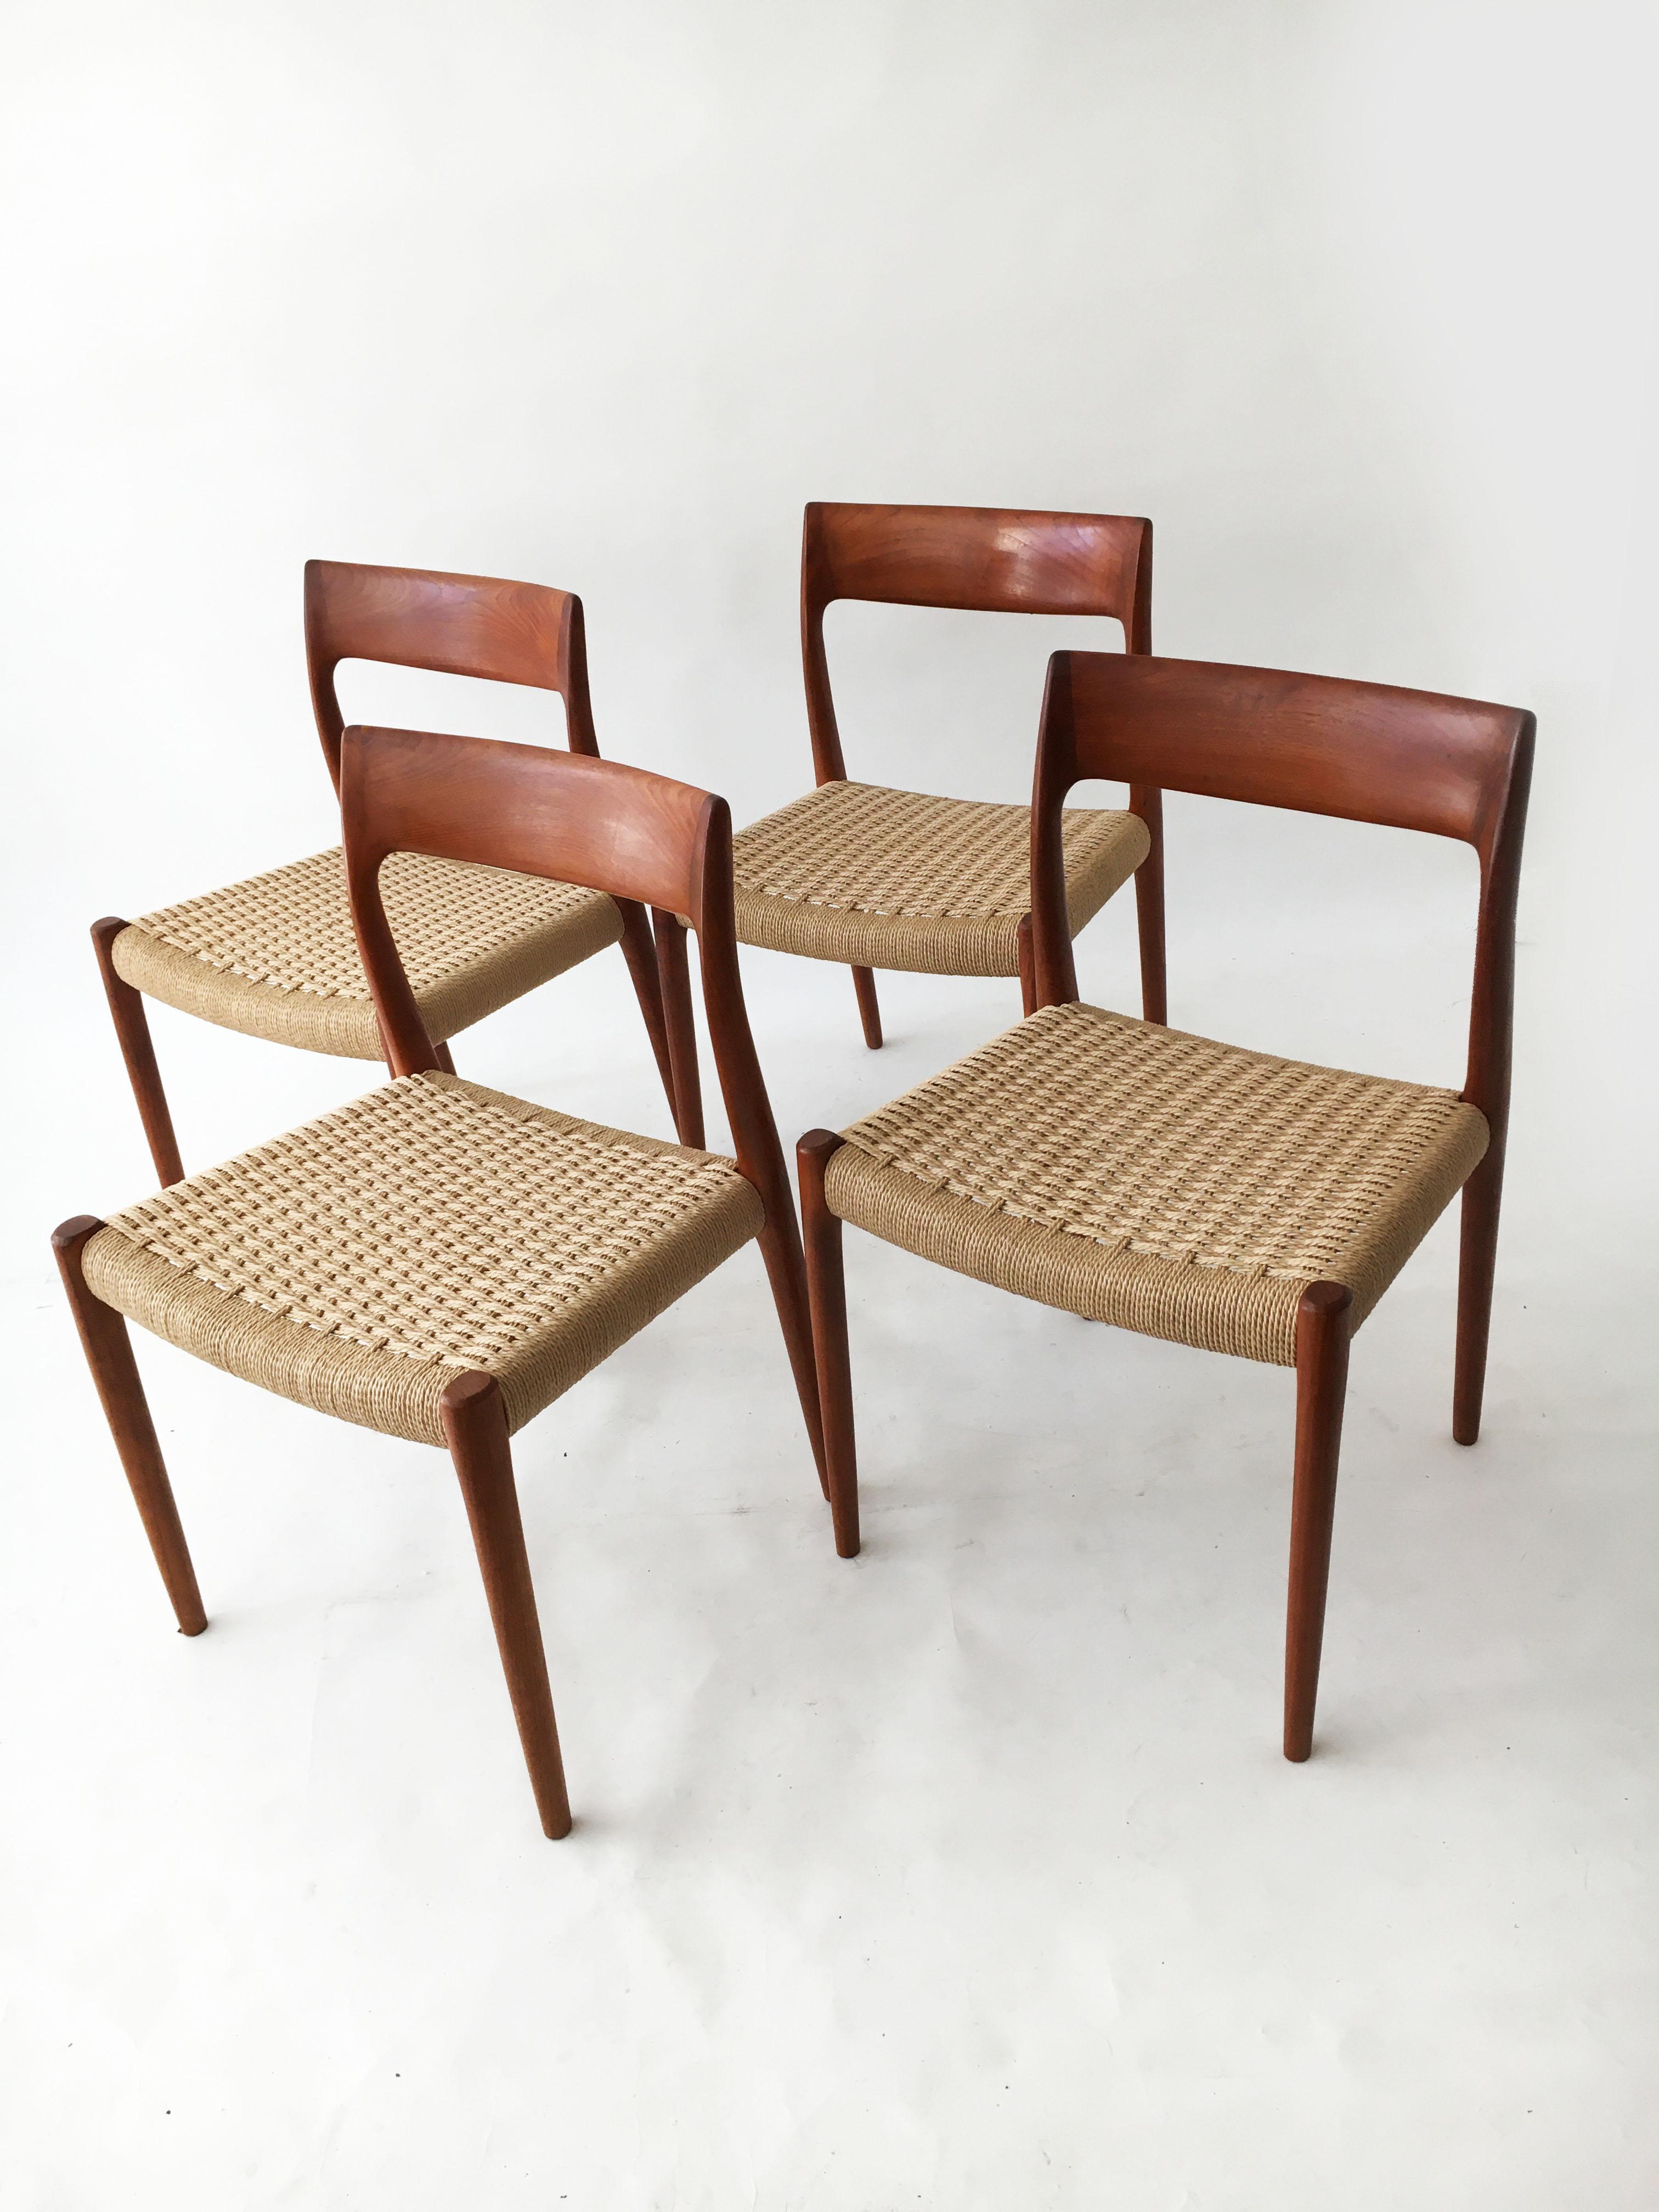 Niels Otto Møller Model 77 Set of Four Vintage Teak Dining Chairs, Denmark 1958. Original paper cord in very good condition. 